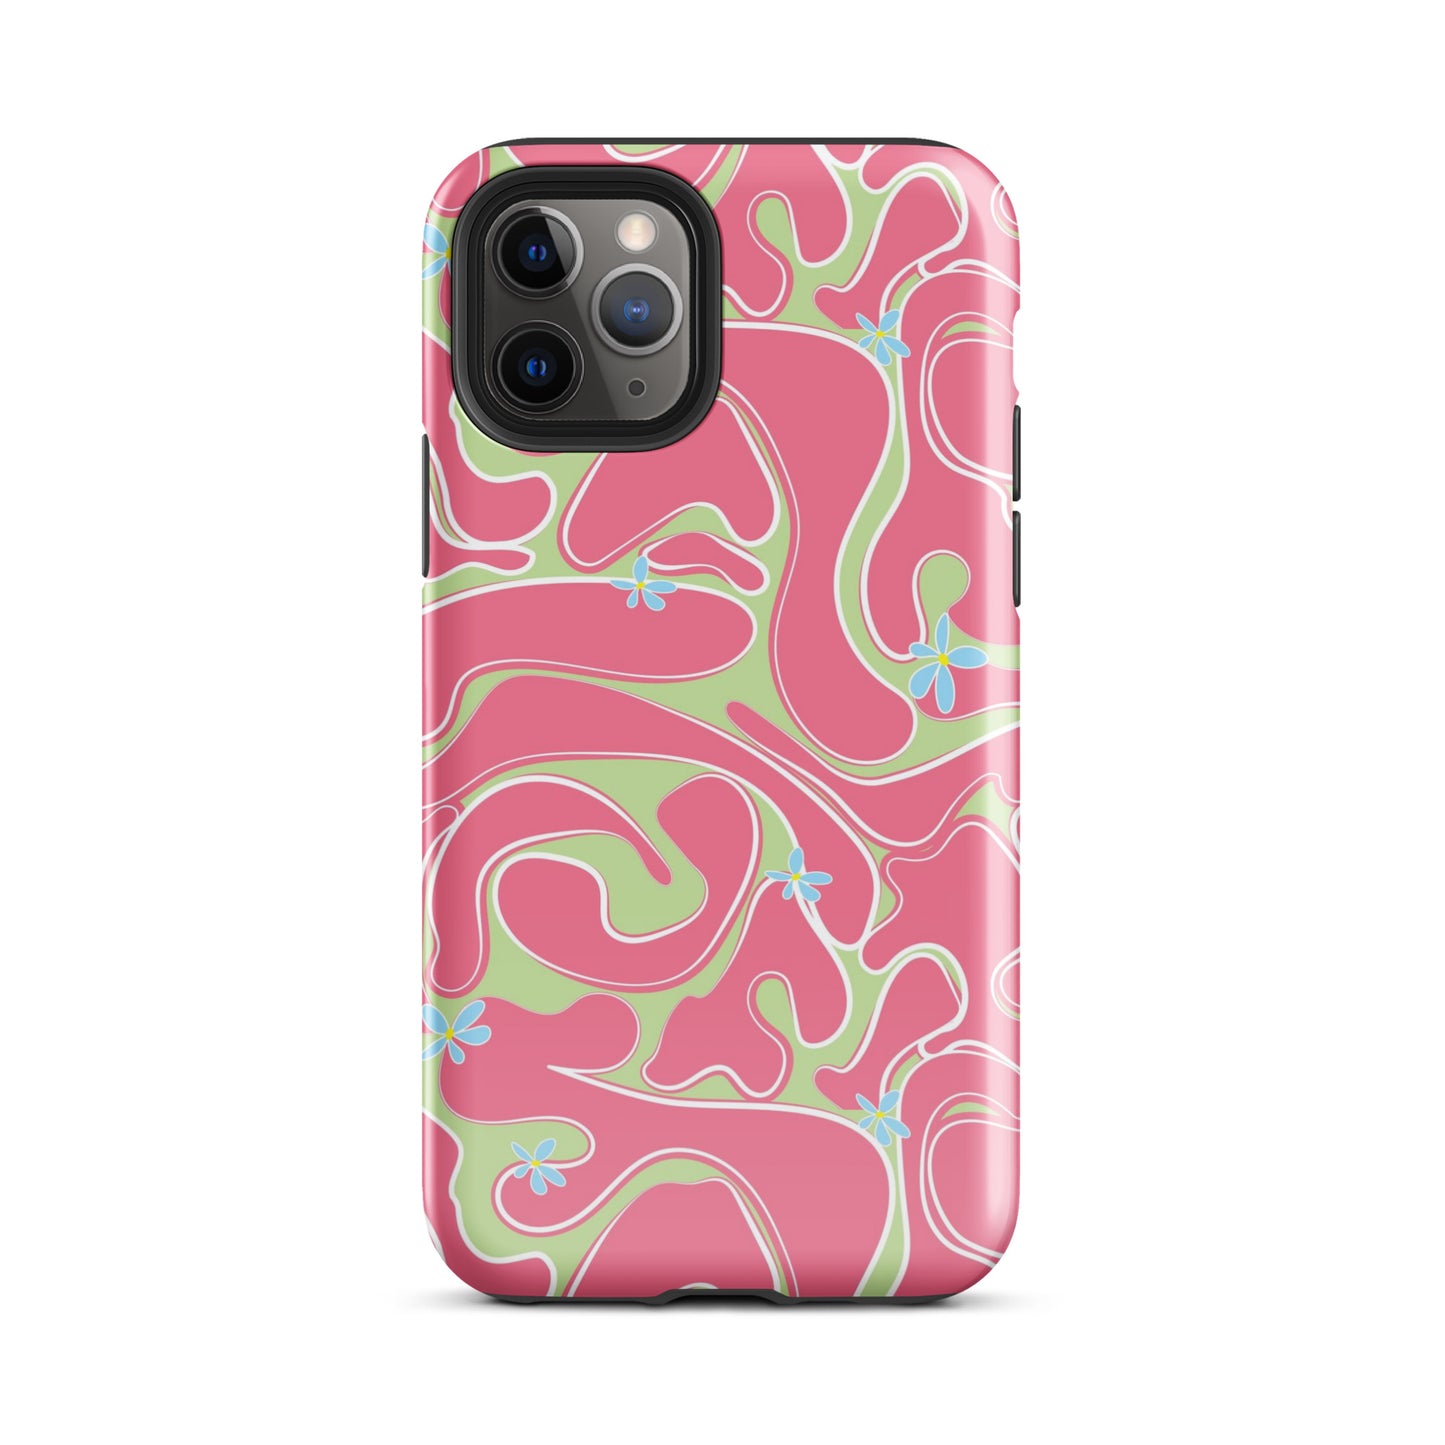 Reef Waves iPhone Case Glossy iPhone 11 Pro